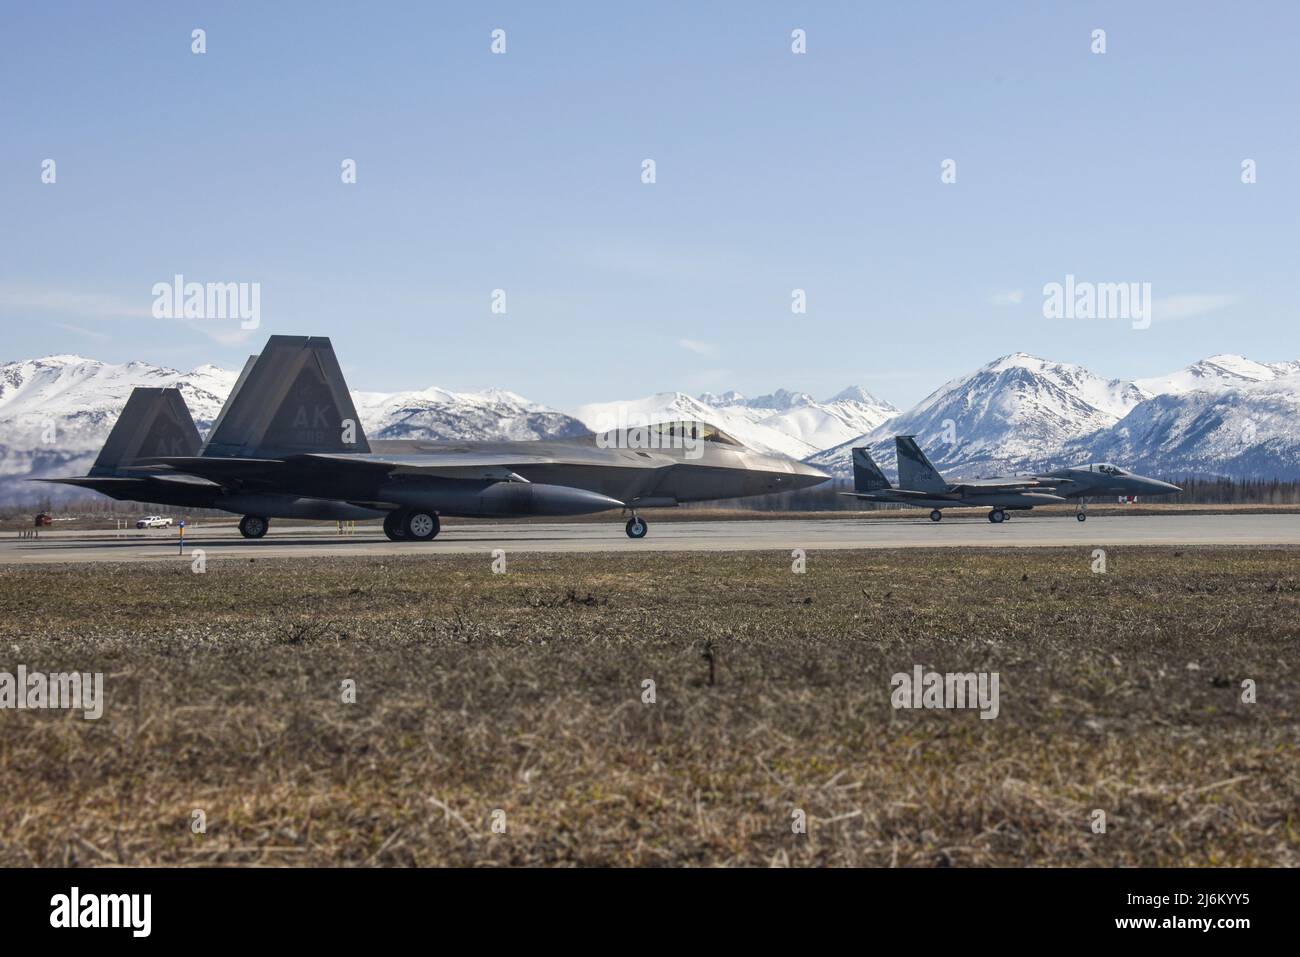 Two F-15C Eagles from the 144th Fighter Wing and two F-22 Raptors from the 3rd Fighter Wing prepare to take off from Joint Base Elmendorf-Richardson, Alaska, April 18, 2022, during an Aerospae Control Alert training scramble. It has been almost a decade since F-15 Eagles have sat alert in the region, protecting the airspace of the United States and Canada. The overall alert mission and corresponding training missions at JBER focused on fighter integration between fourth-generation F-15 Eagles and fifth-generation F-22 Raptors and their ability to interoperate seamlessly. (U.S. Air National Gua Stock Photo